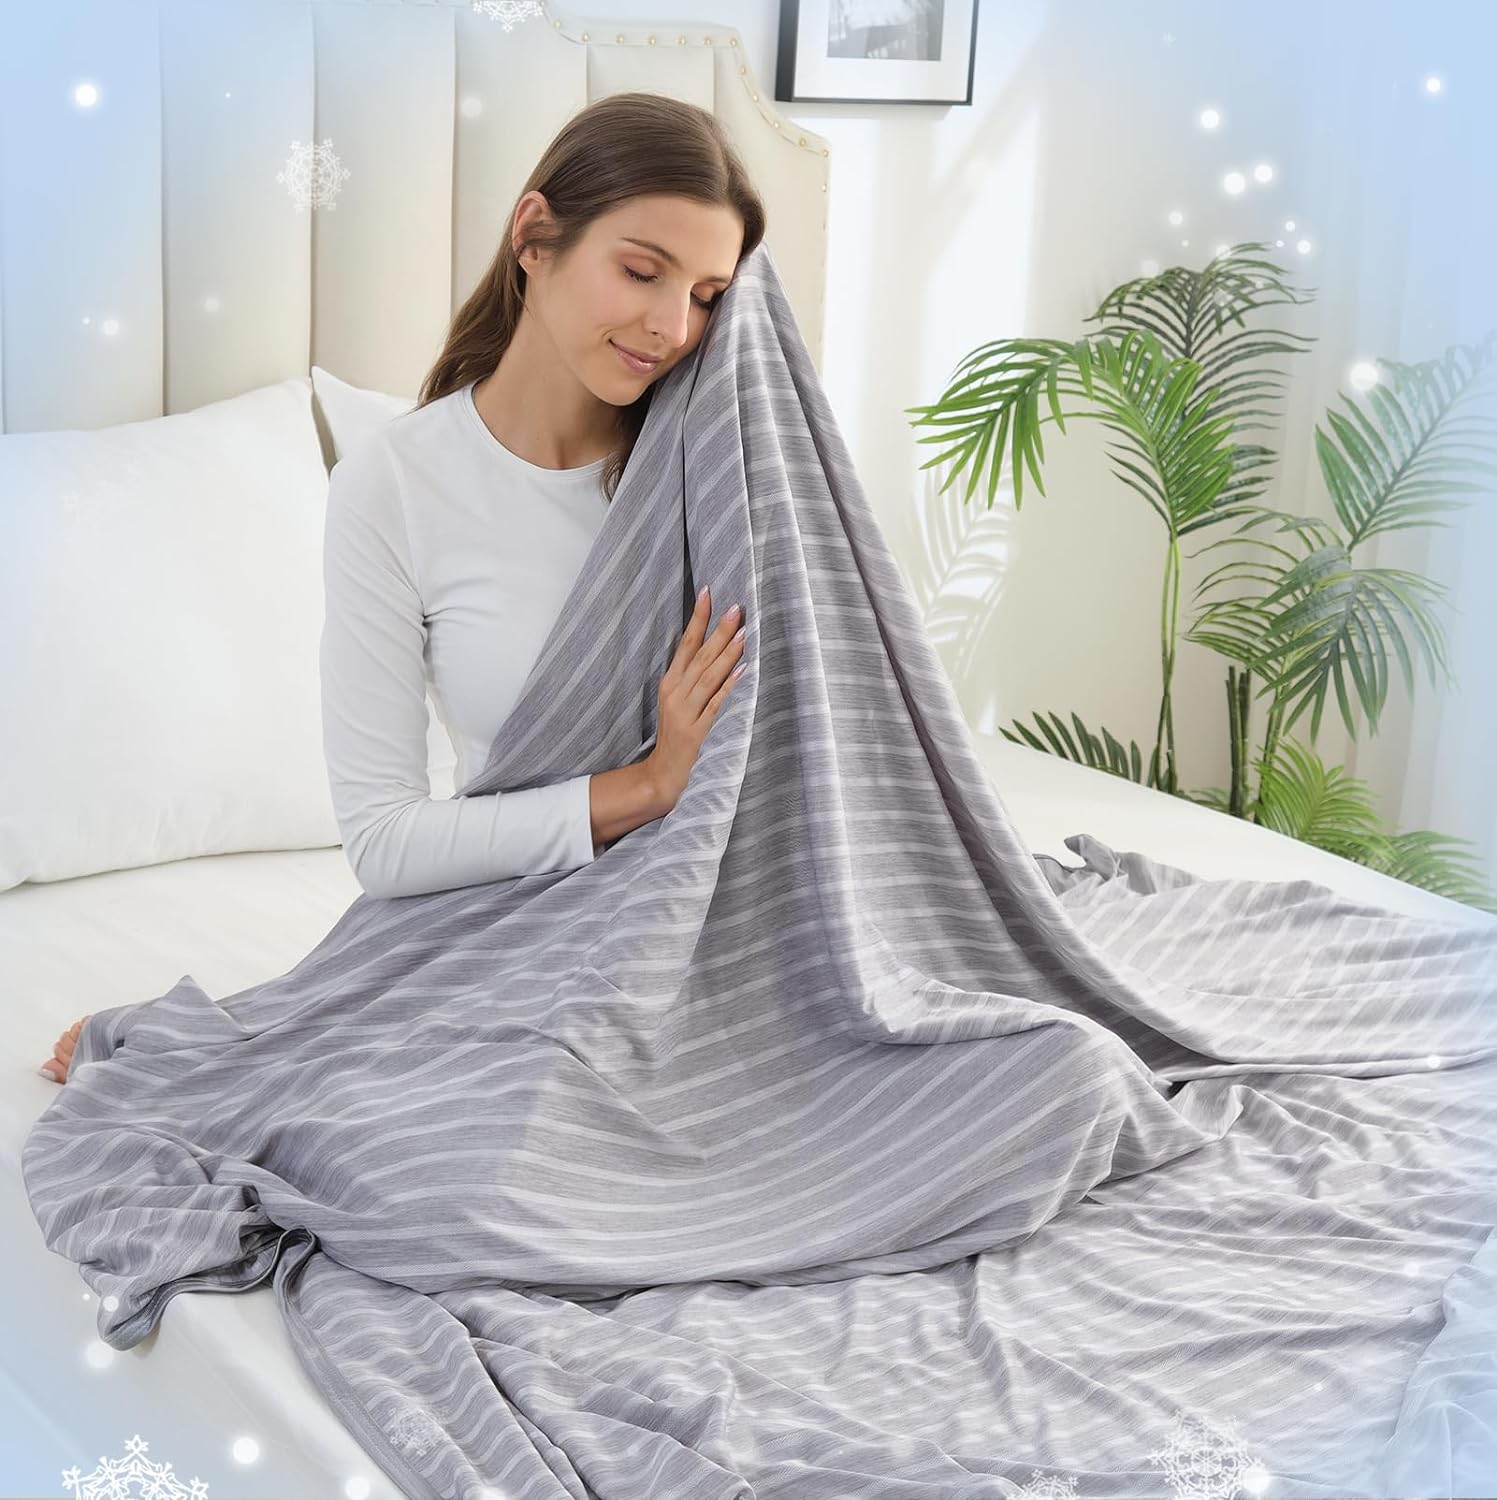 Cooling Blanket for Night Sweats Decorative - Stay Cool and Comfortable All Night Long, Cooling Blankets for Hot Sleepers,Lightweight Sofa Throw Blanket Grey Throw50''x70''